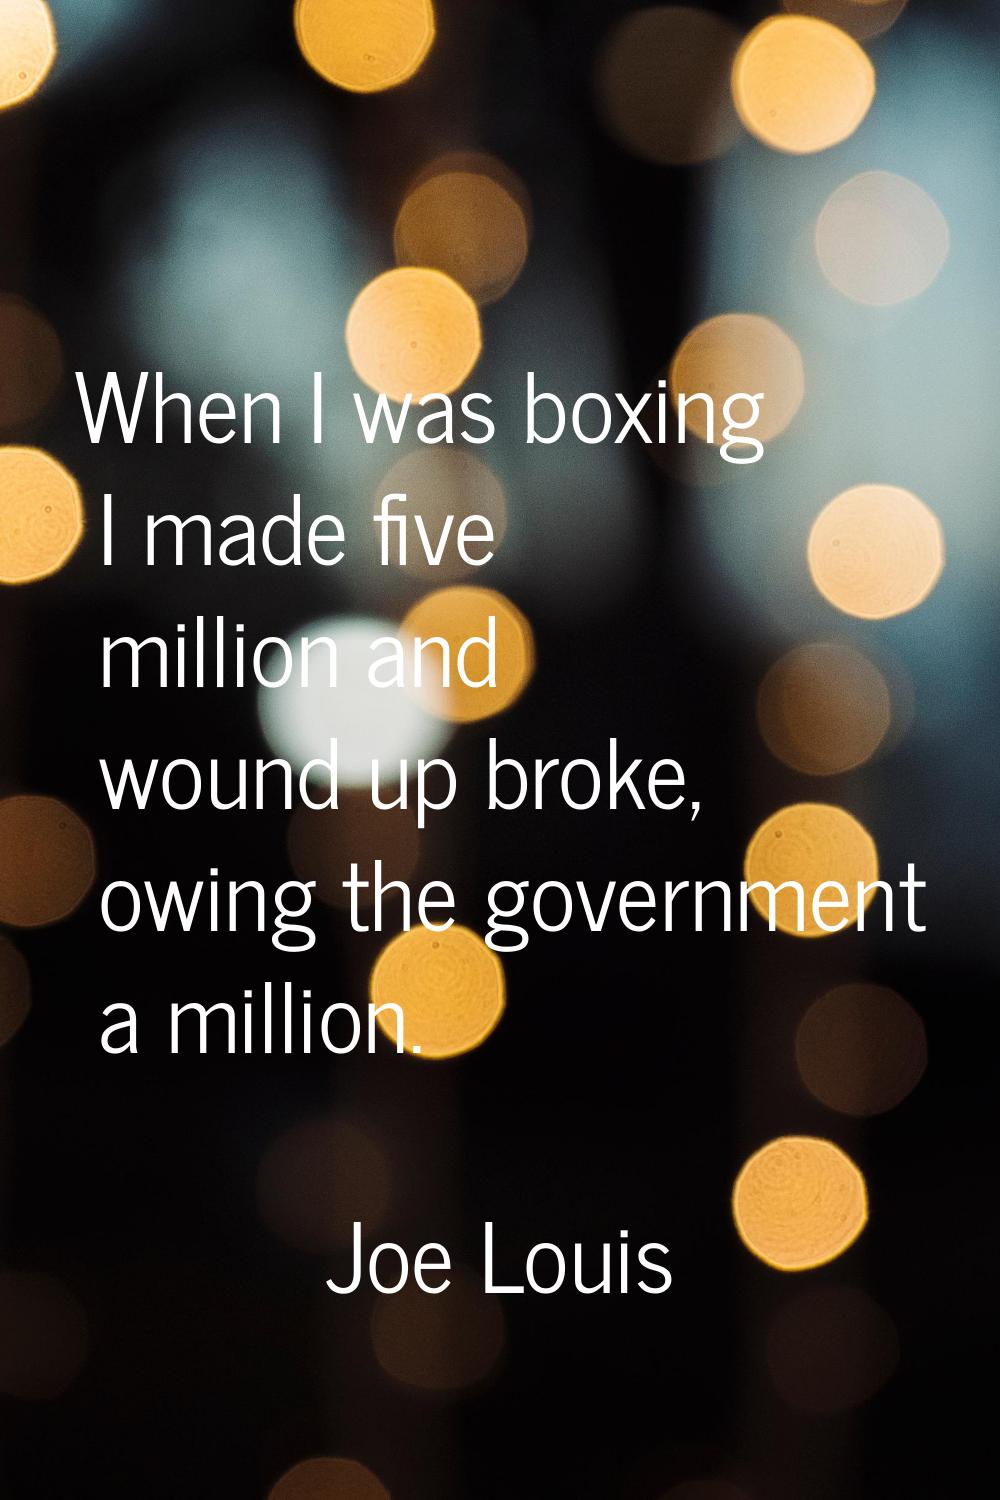 When I was boxing I made five million and wound up broke, owing the government a million.